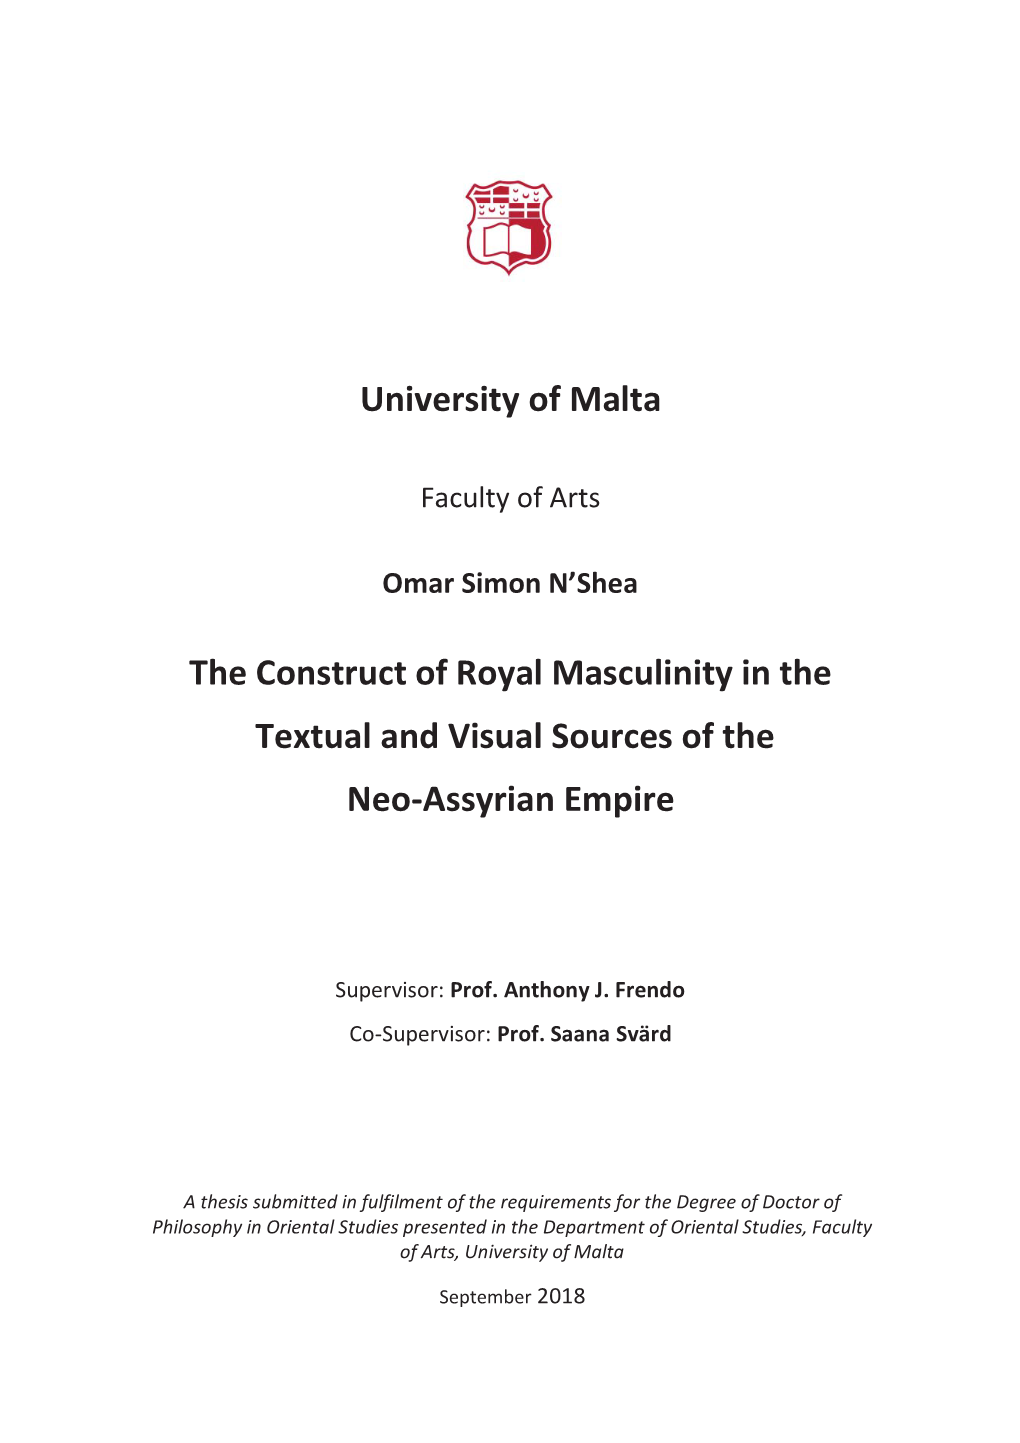 University of Malta the Construct of Royal Masculinity in the Textual